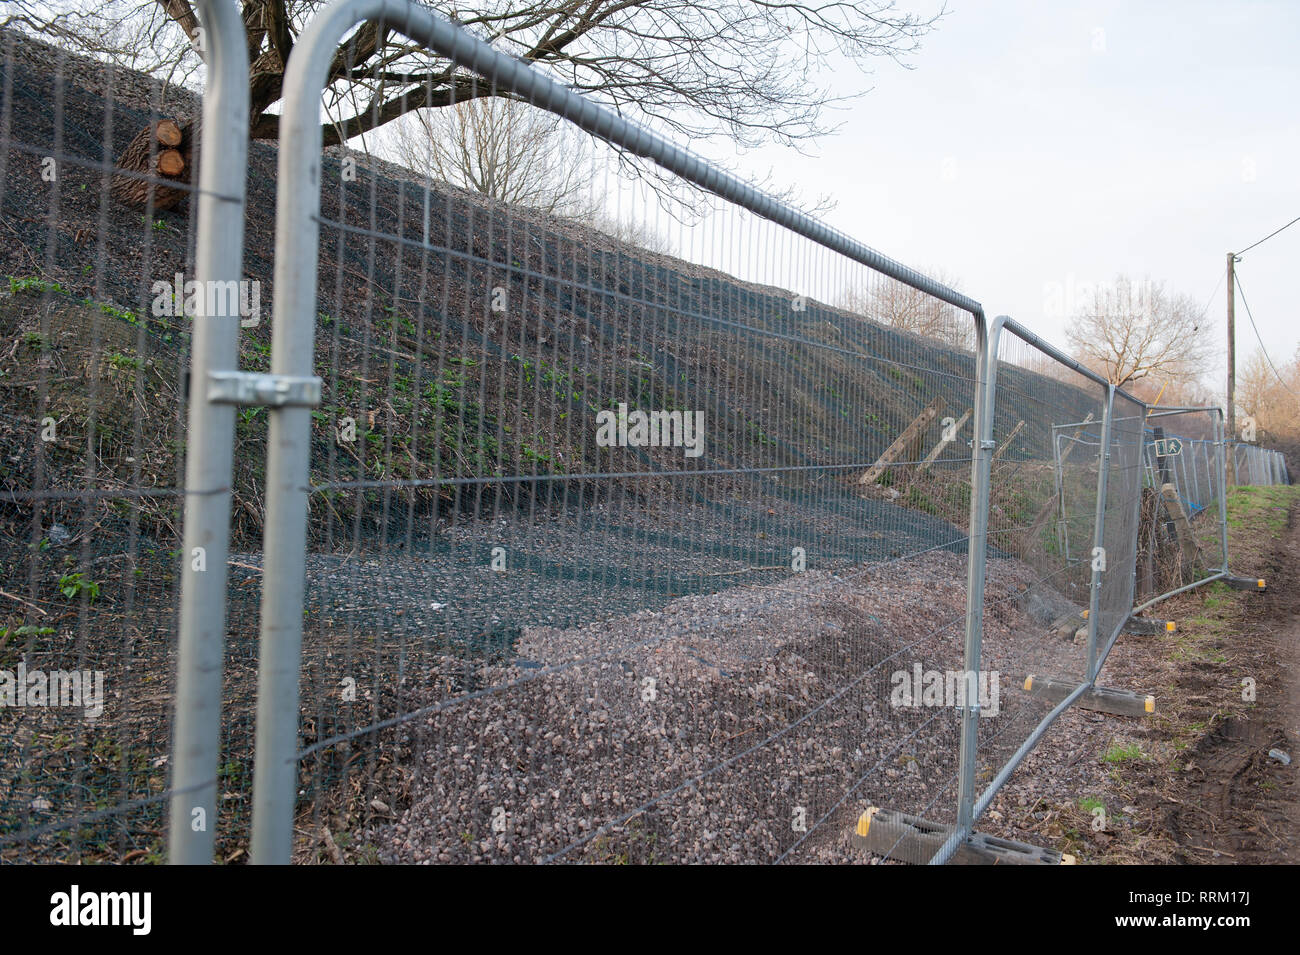 Safety barriers and protective netting for works being carried out on railway embankment. Stock Photo